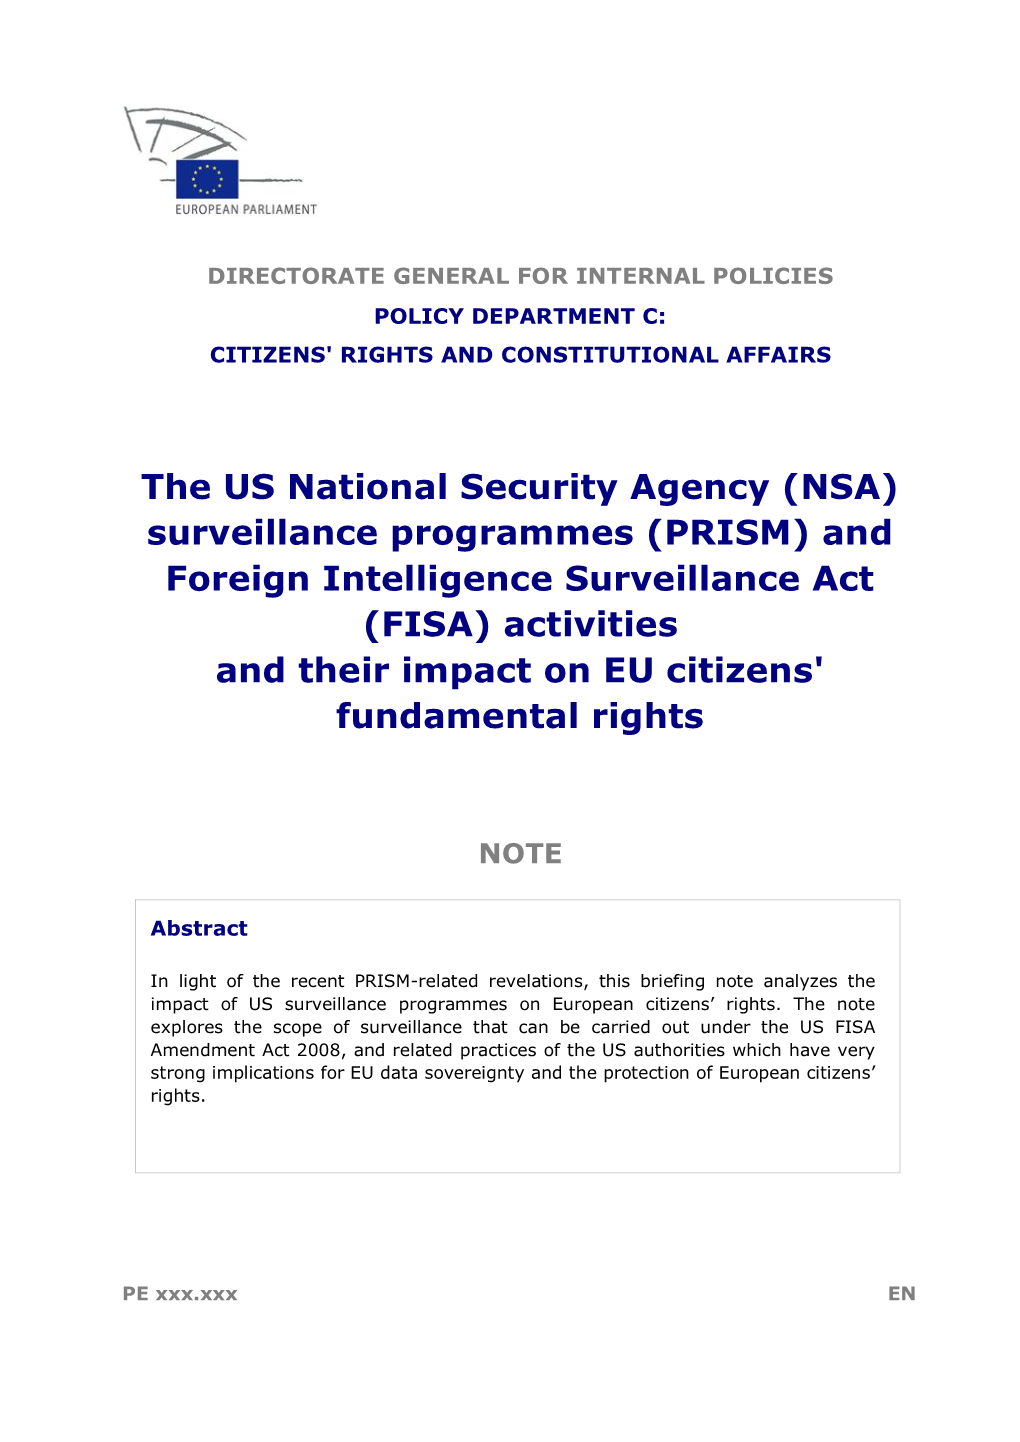 NSA) Surveillance Programmes (PRISM) and Foreign Intelligence